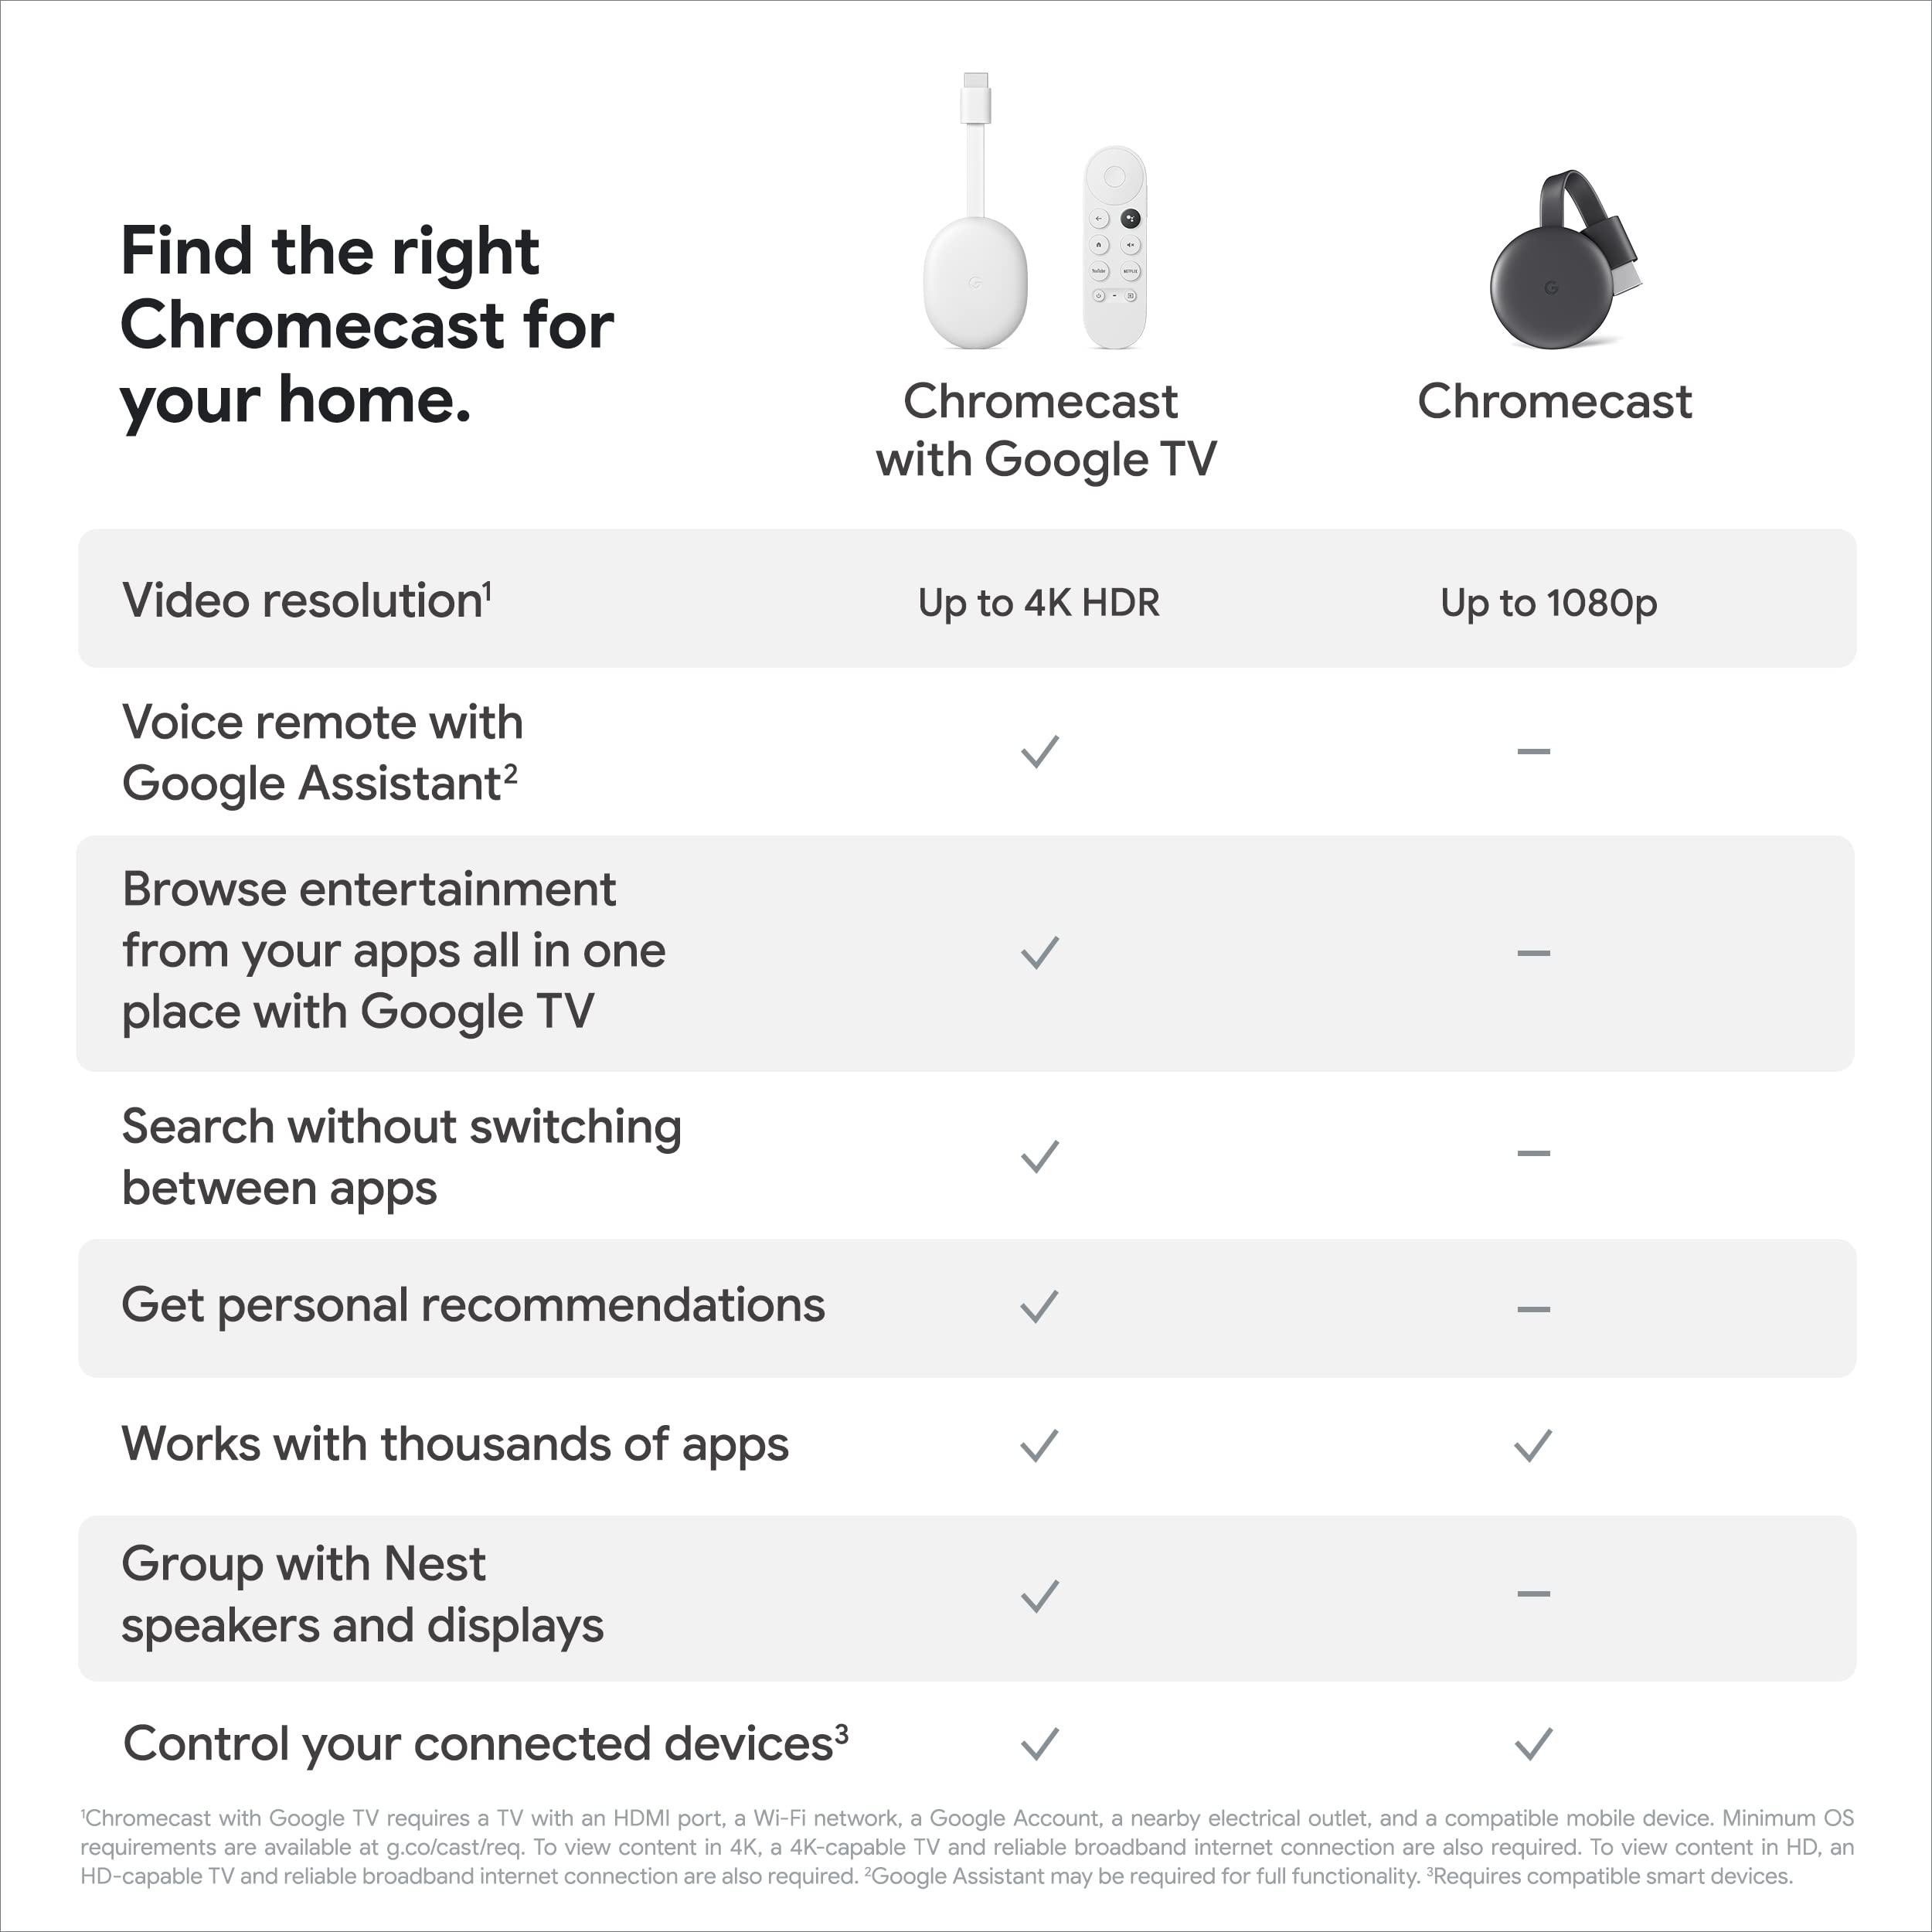 Google Chromecast - Streaming Device with HDMI Cable - Stream Shows, Music, Photos, and Sports from Your Phone to Your TV